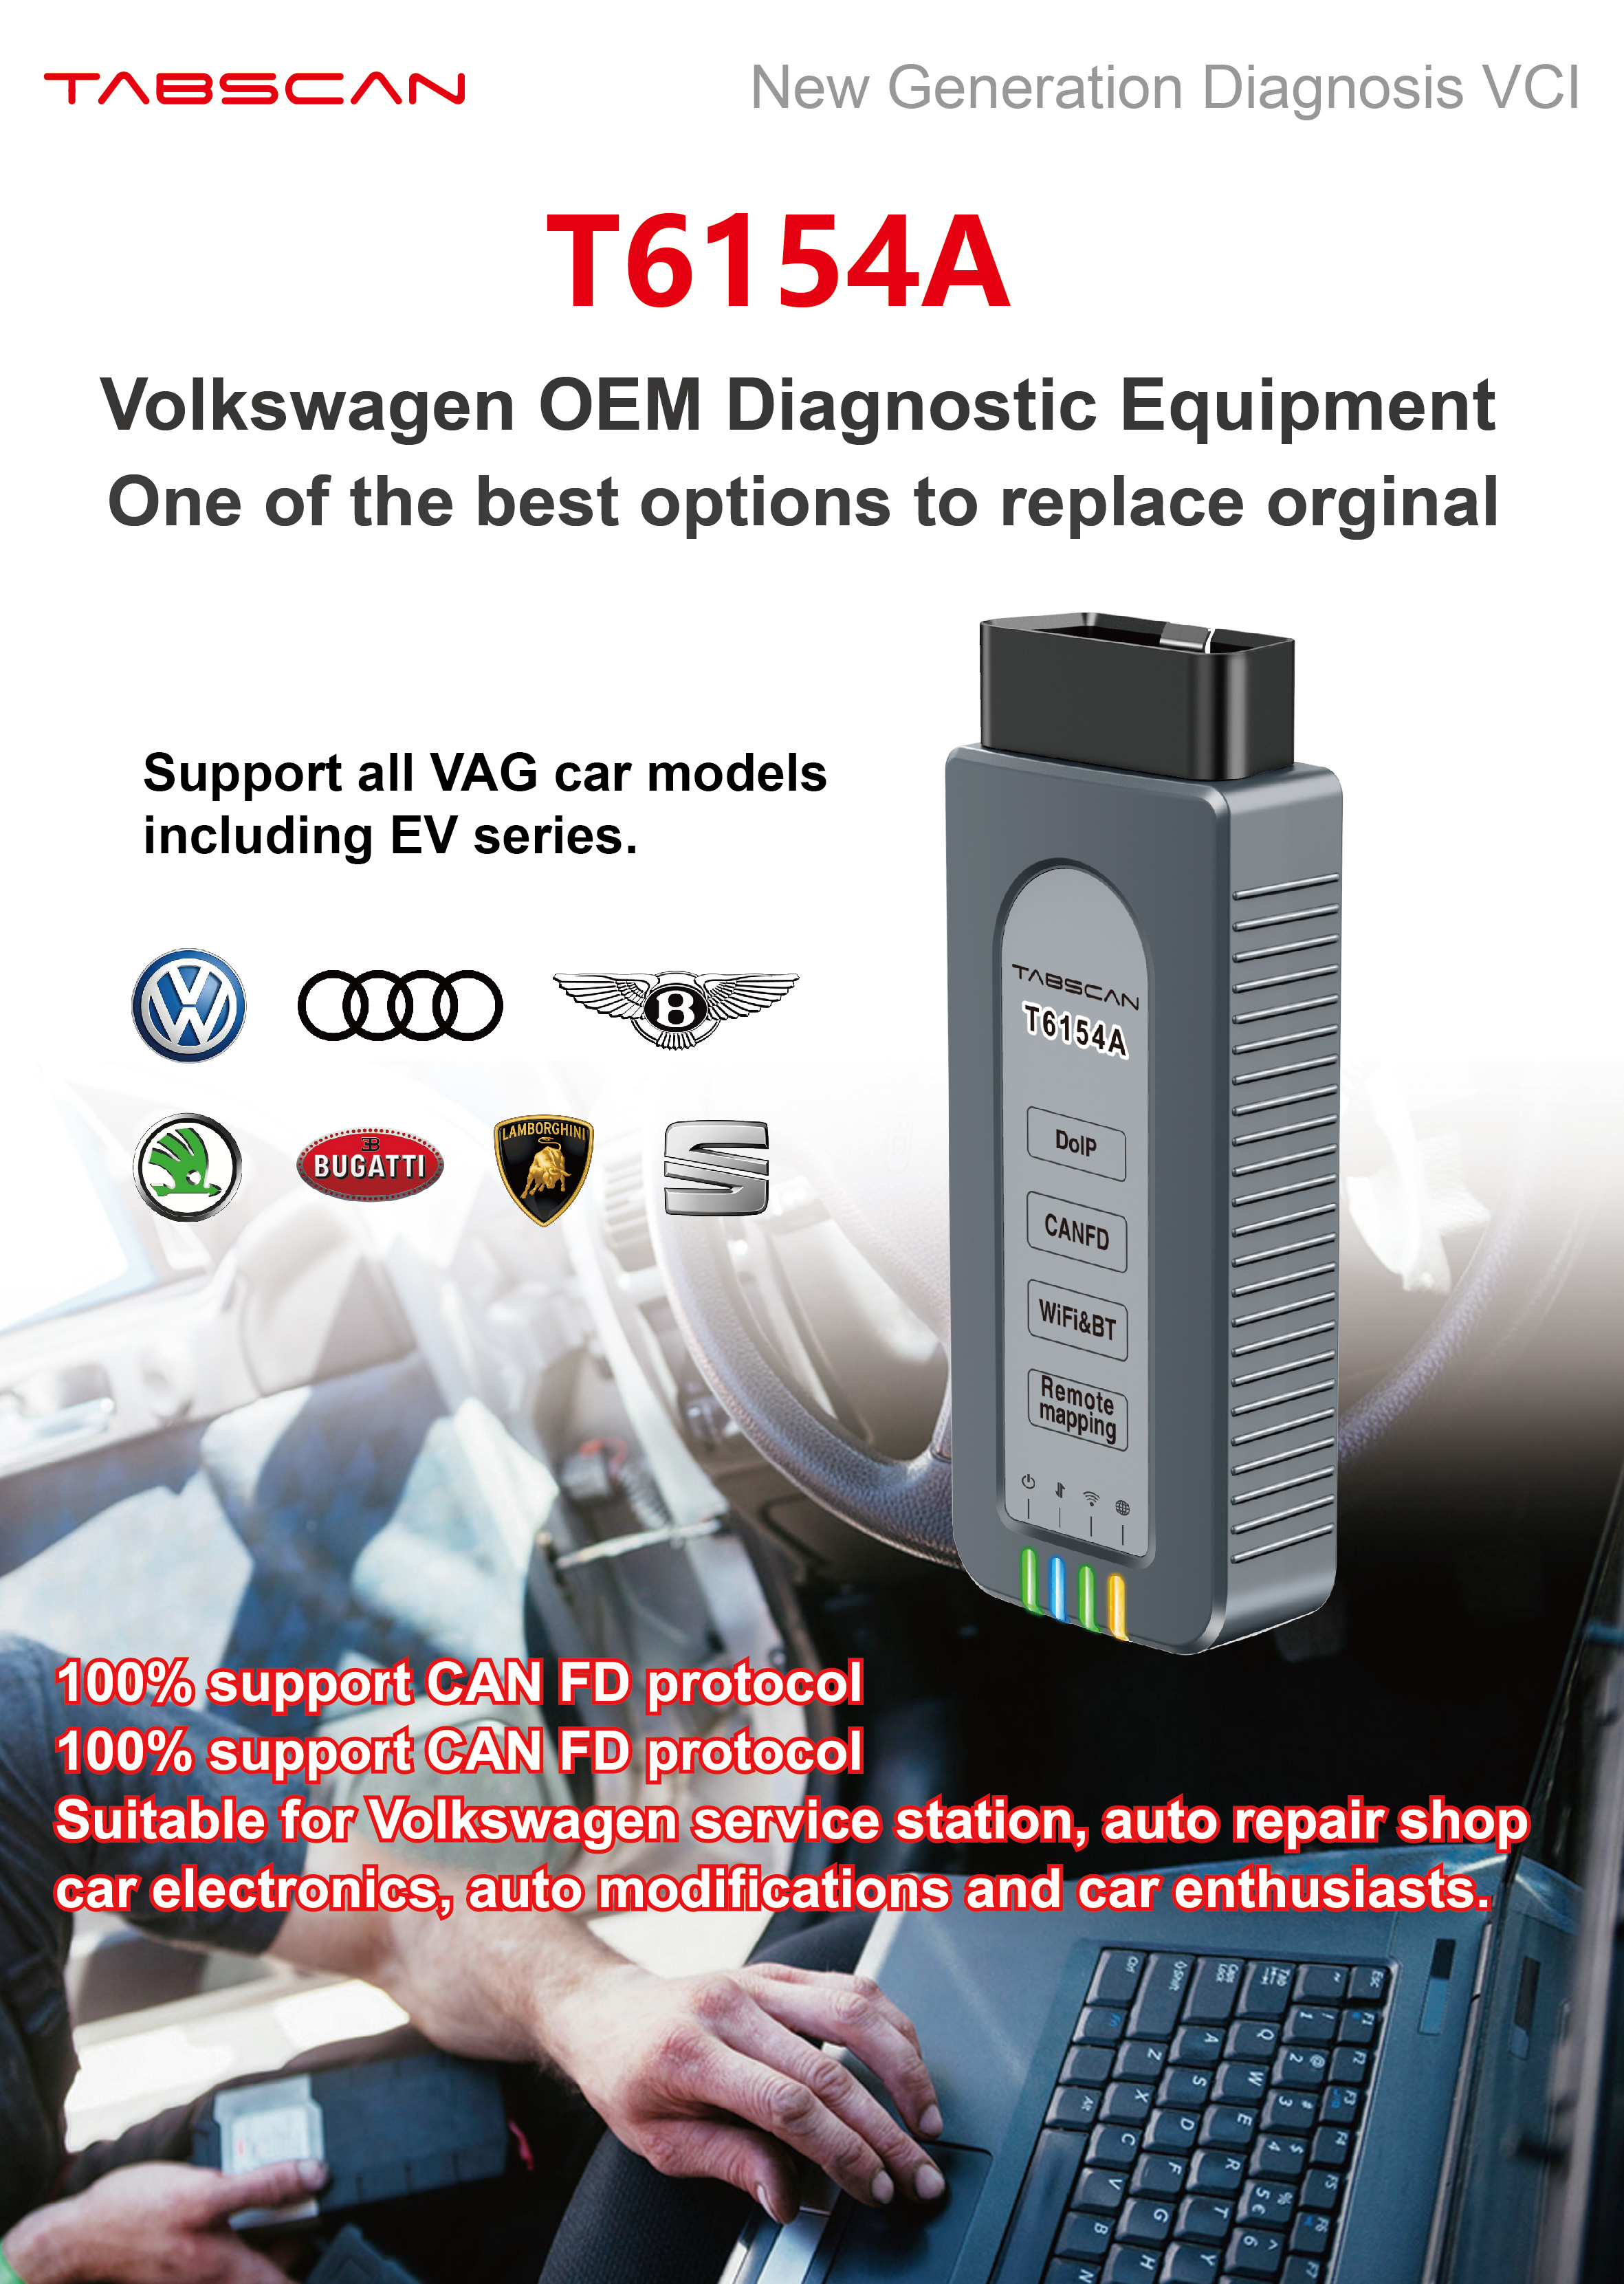 TabScan T6154A New Generation Diagnosis VCI VW OEM Diagn